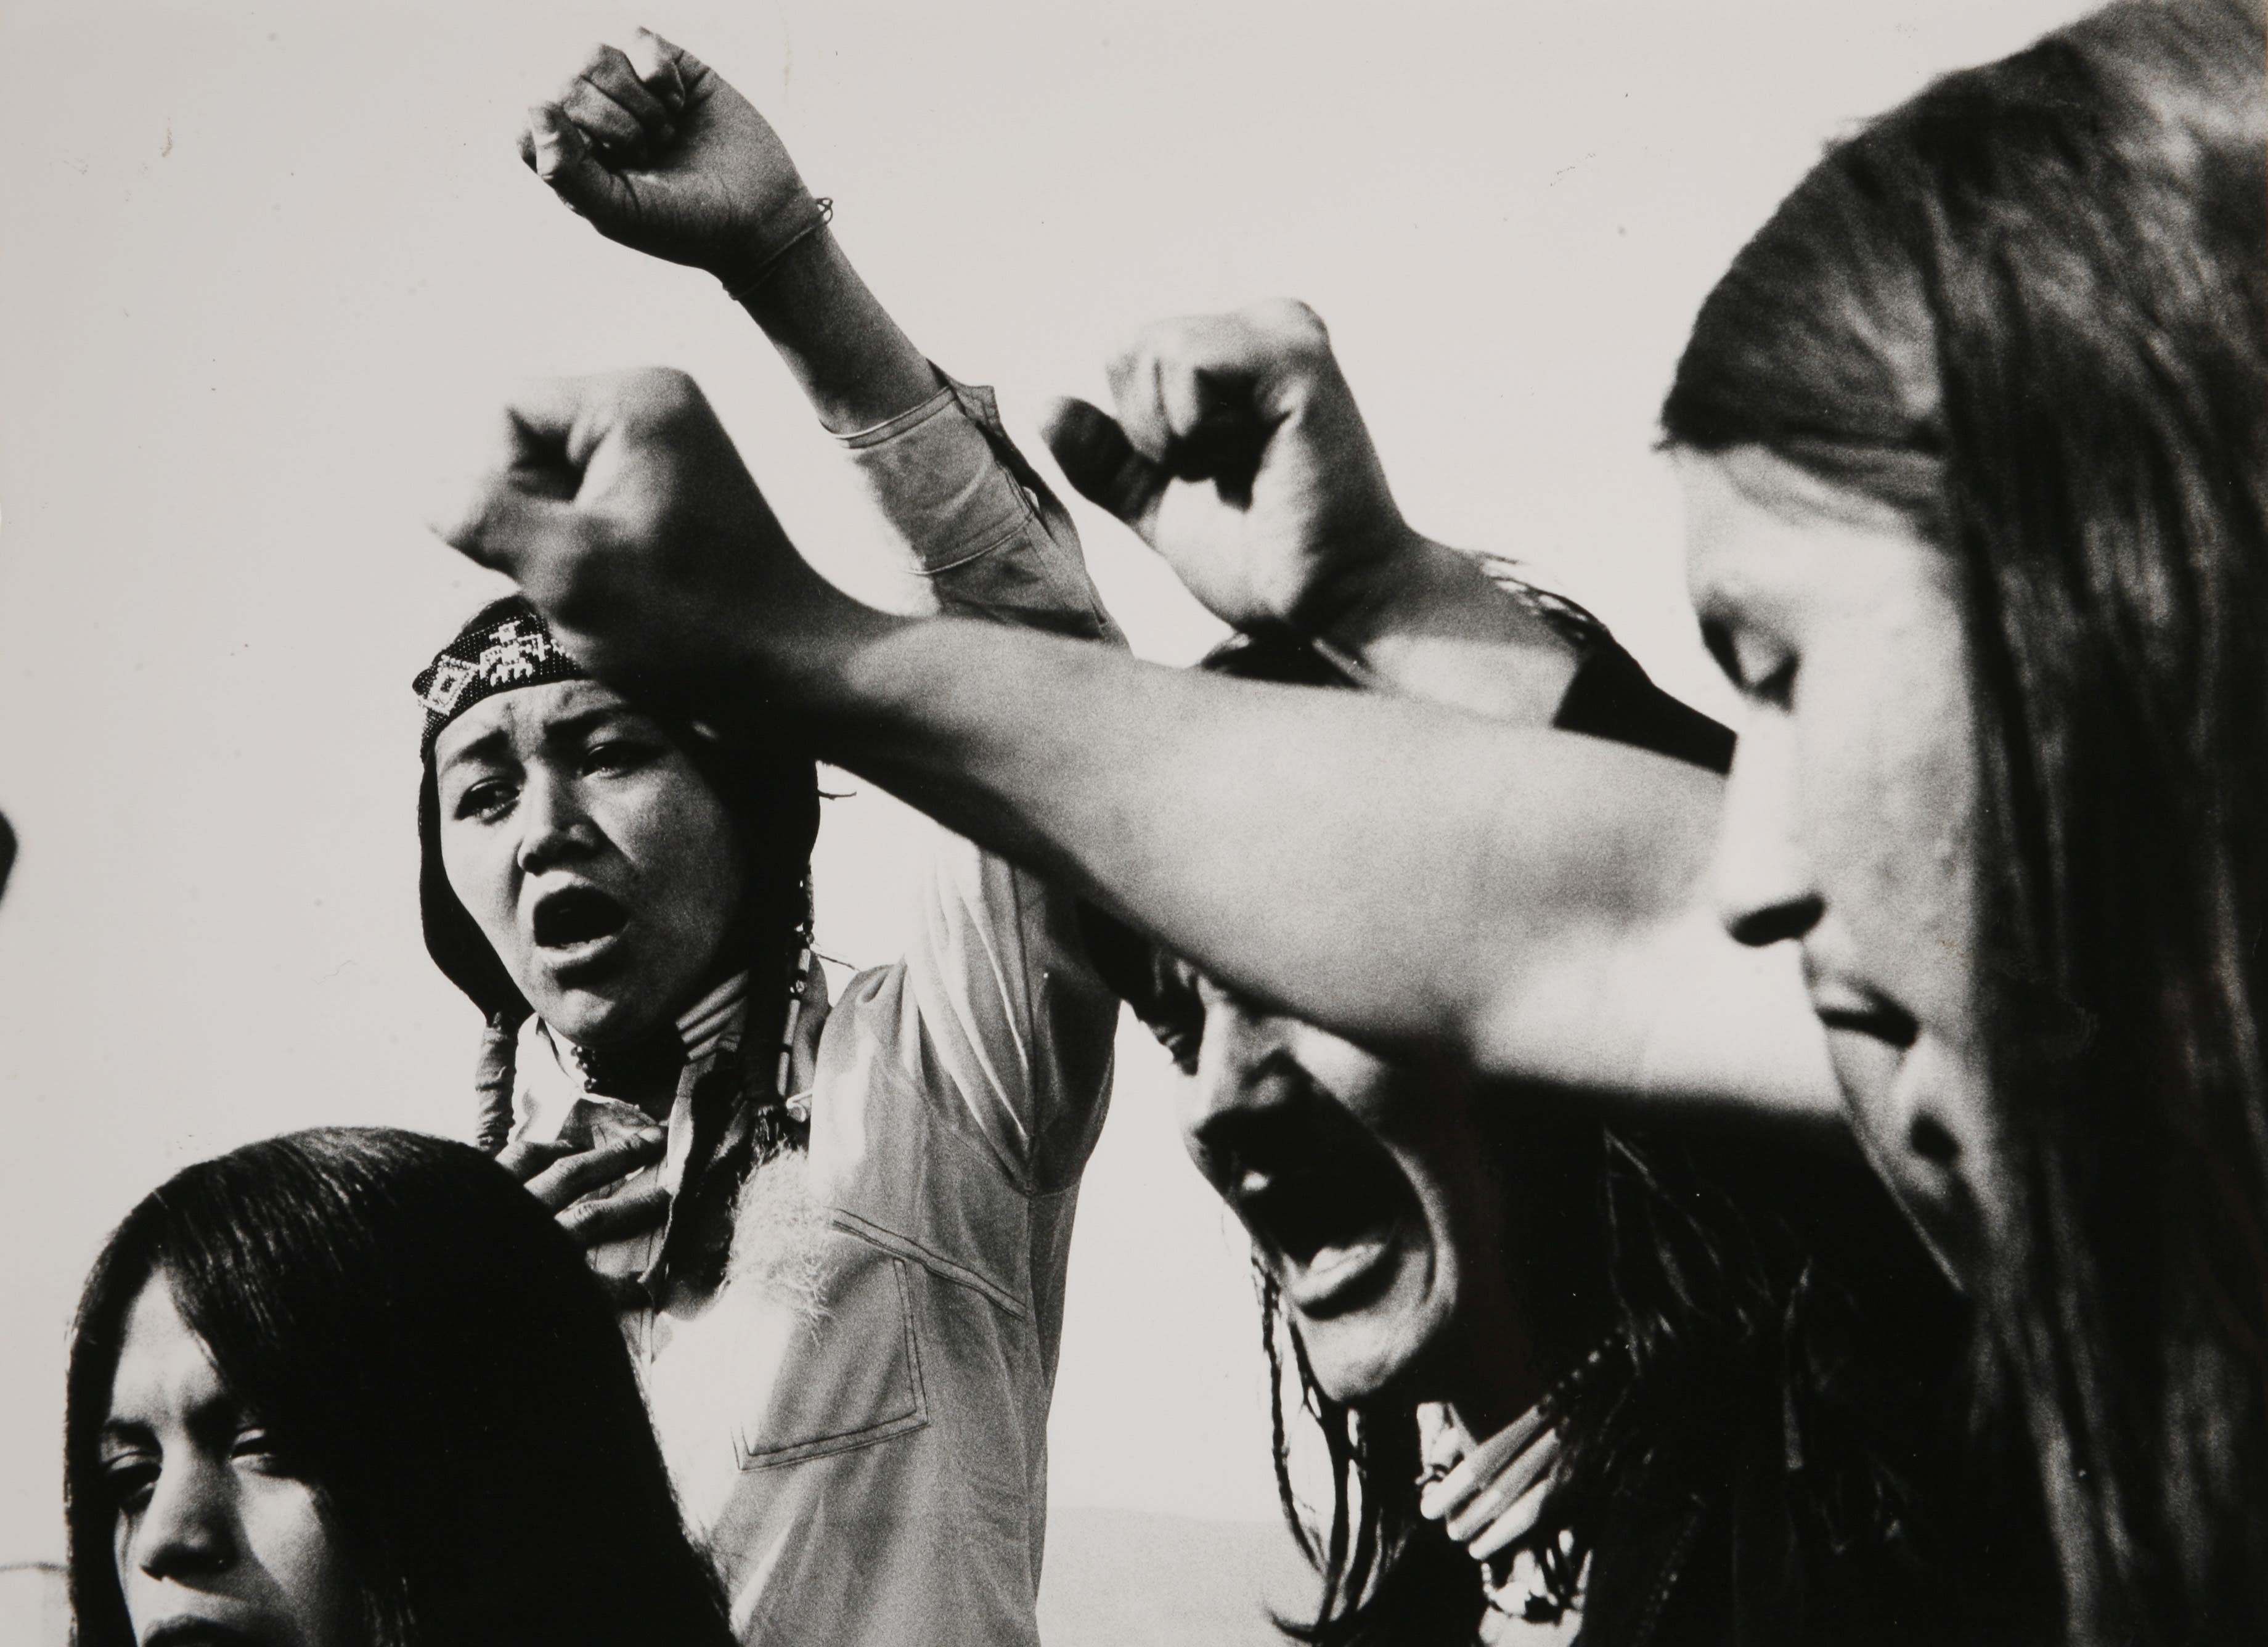 Circa 1975: During a protest gathering, some followers of AIM (American Indian Movement ) raise their fists to swear the Red Power oath.